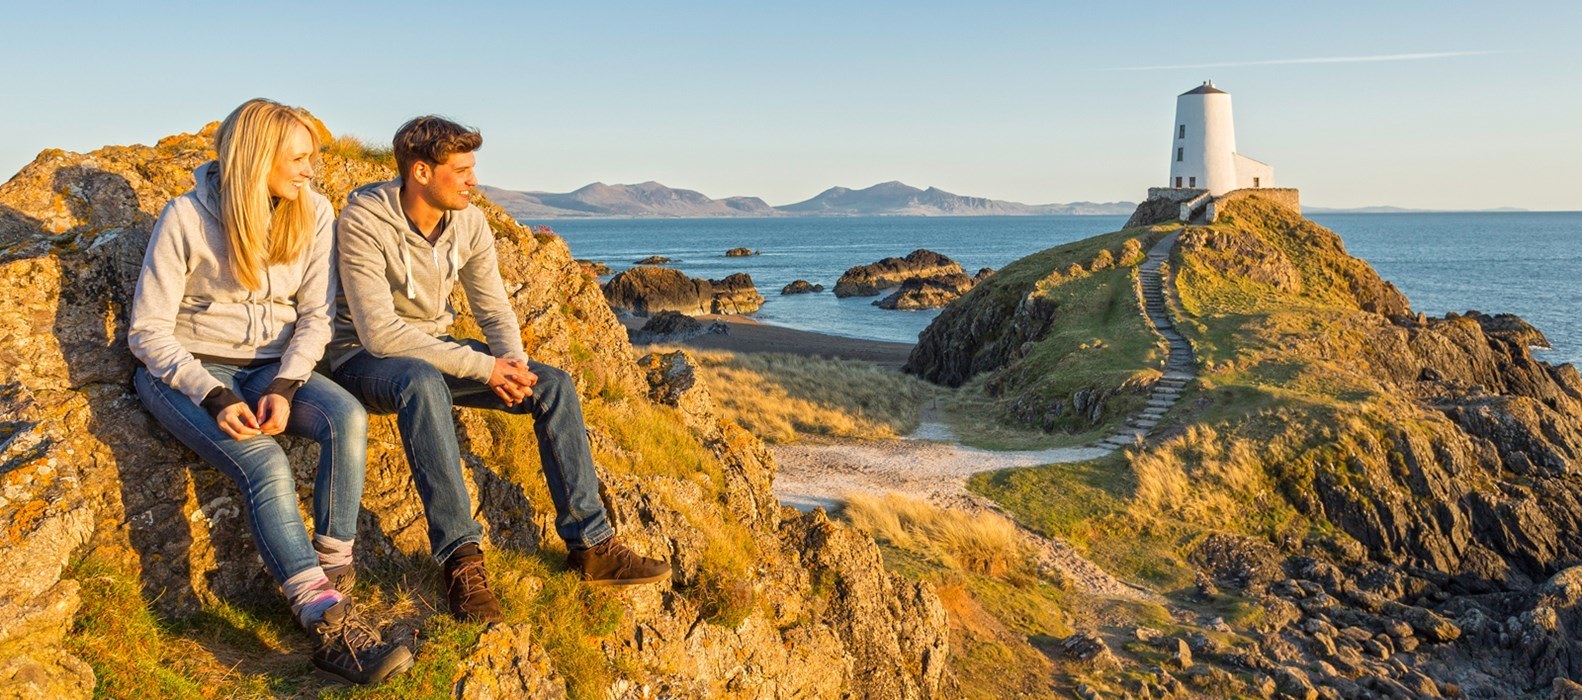 23 Dating Ideas With Breathtaking Scenery in Wales